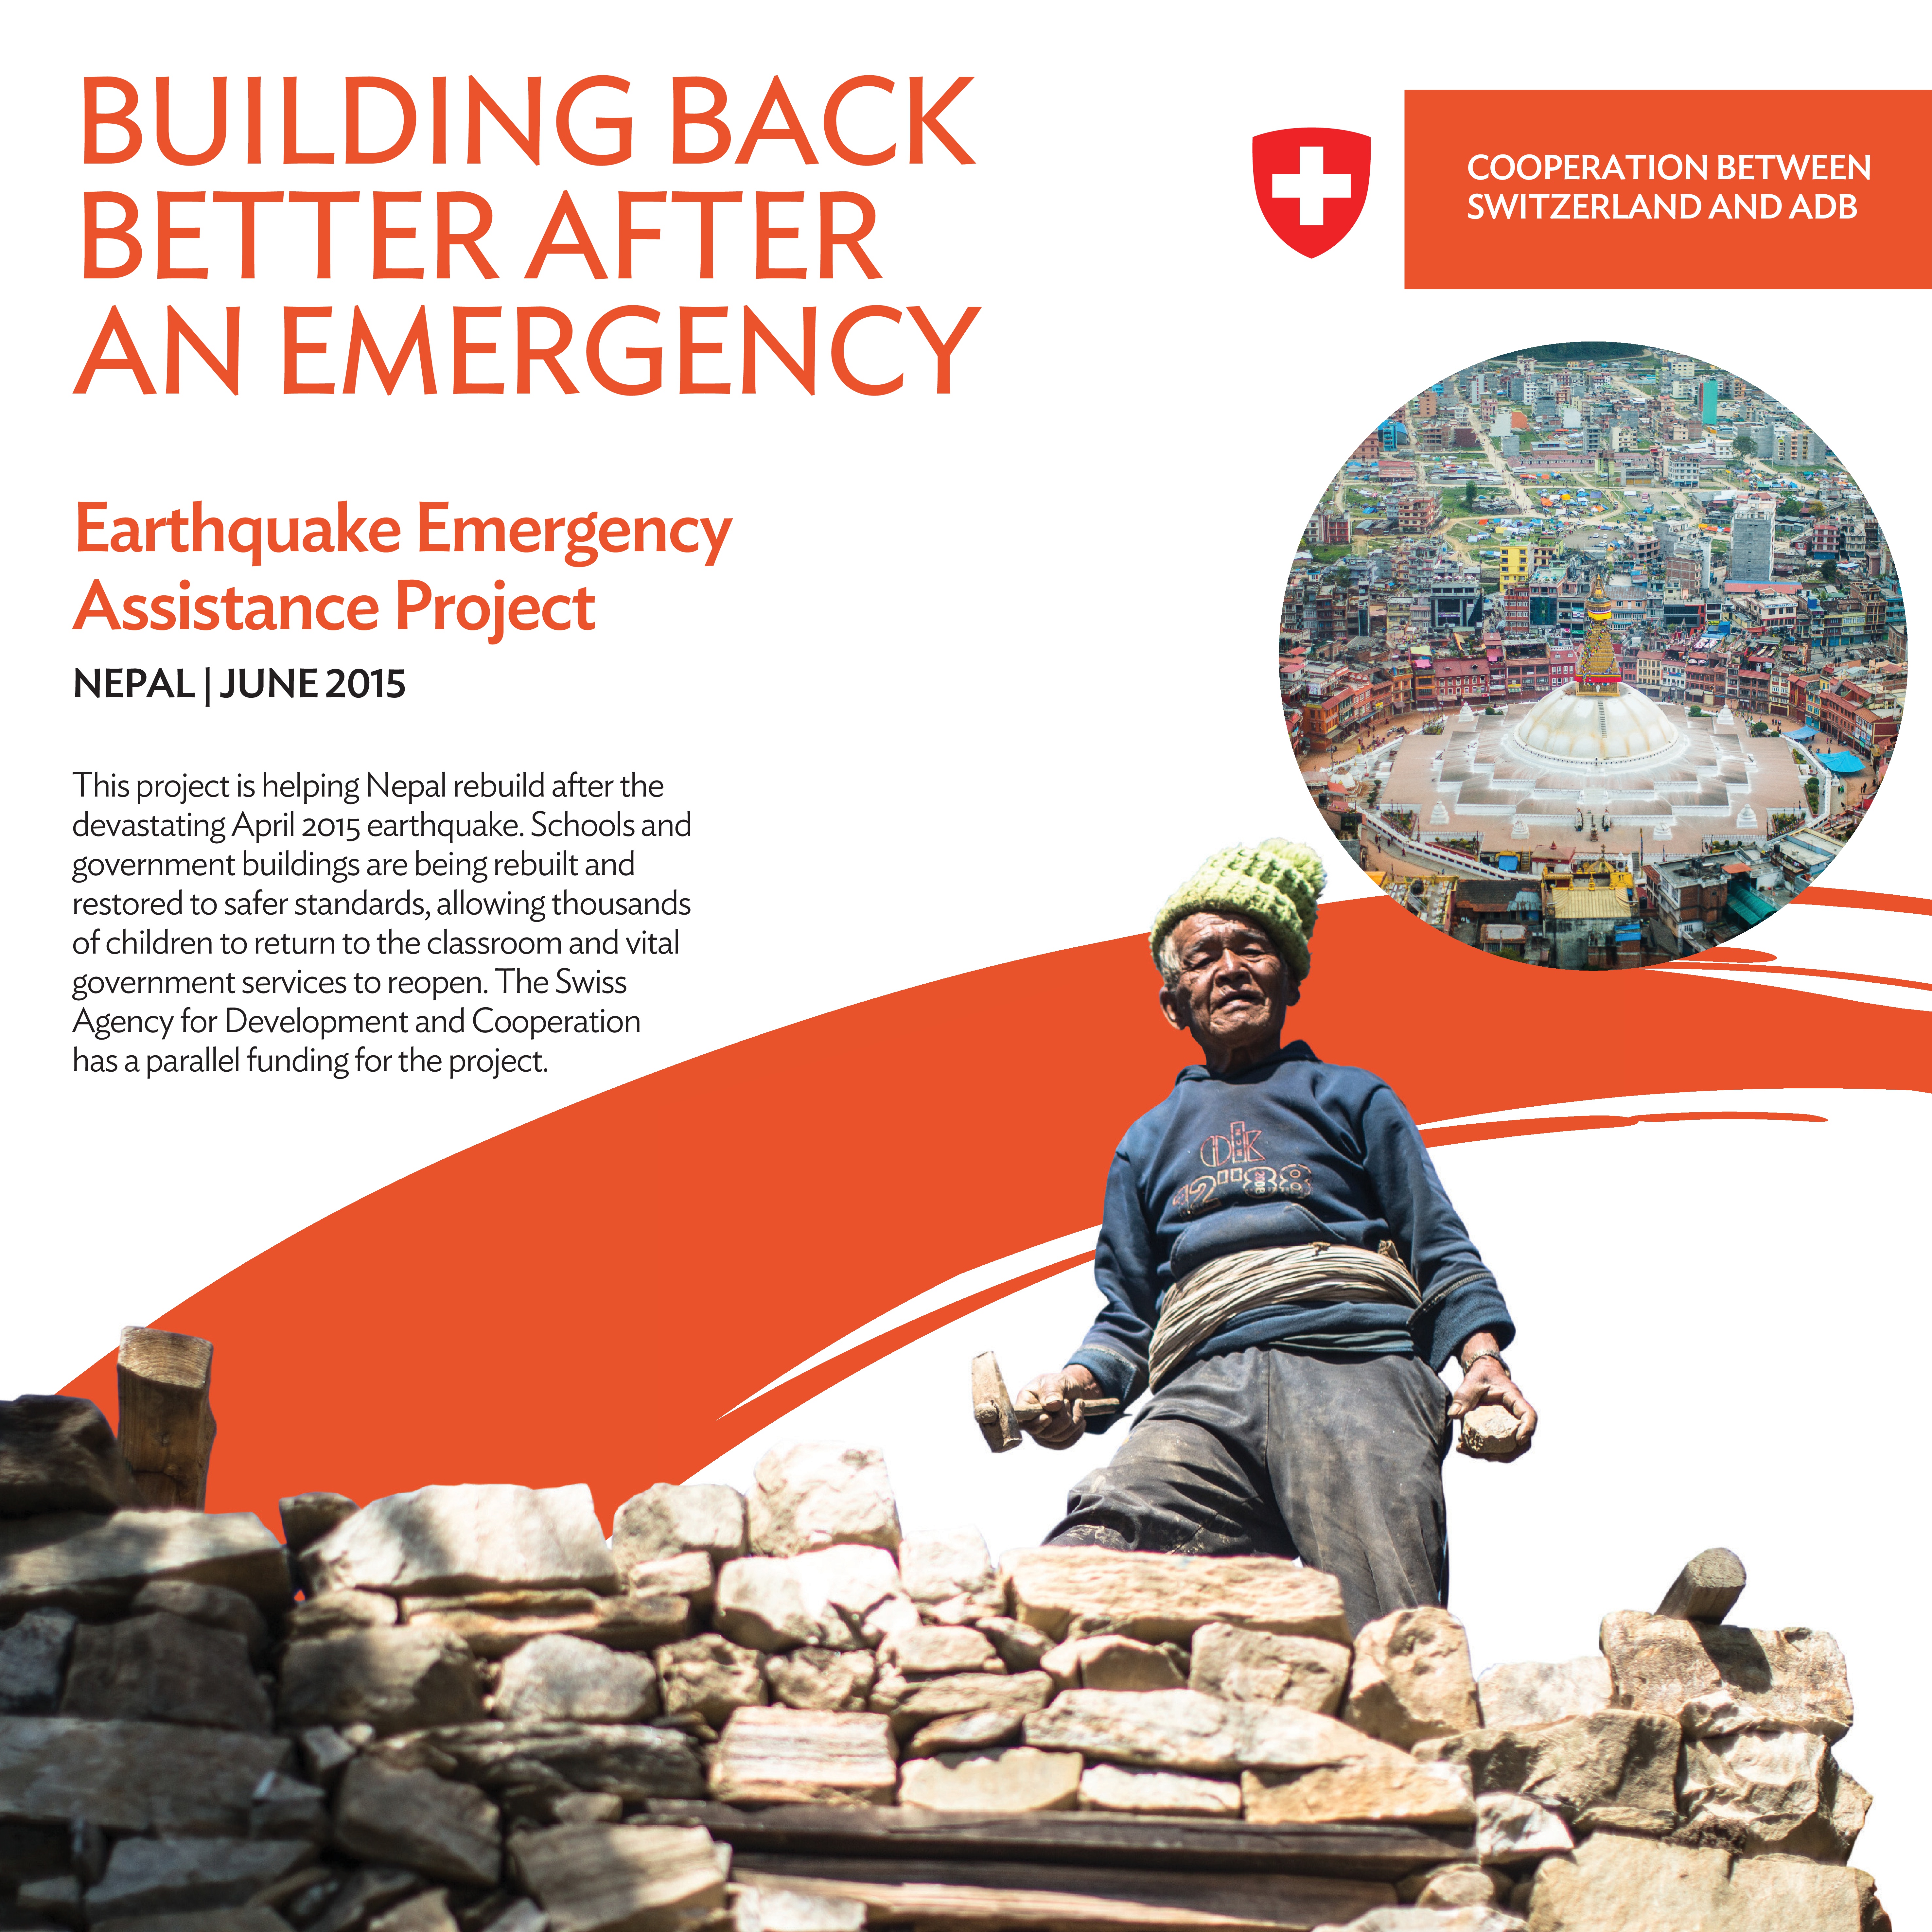 Earthquake Emergency Assistance project, Nepal, June 2015